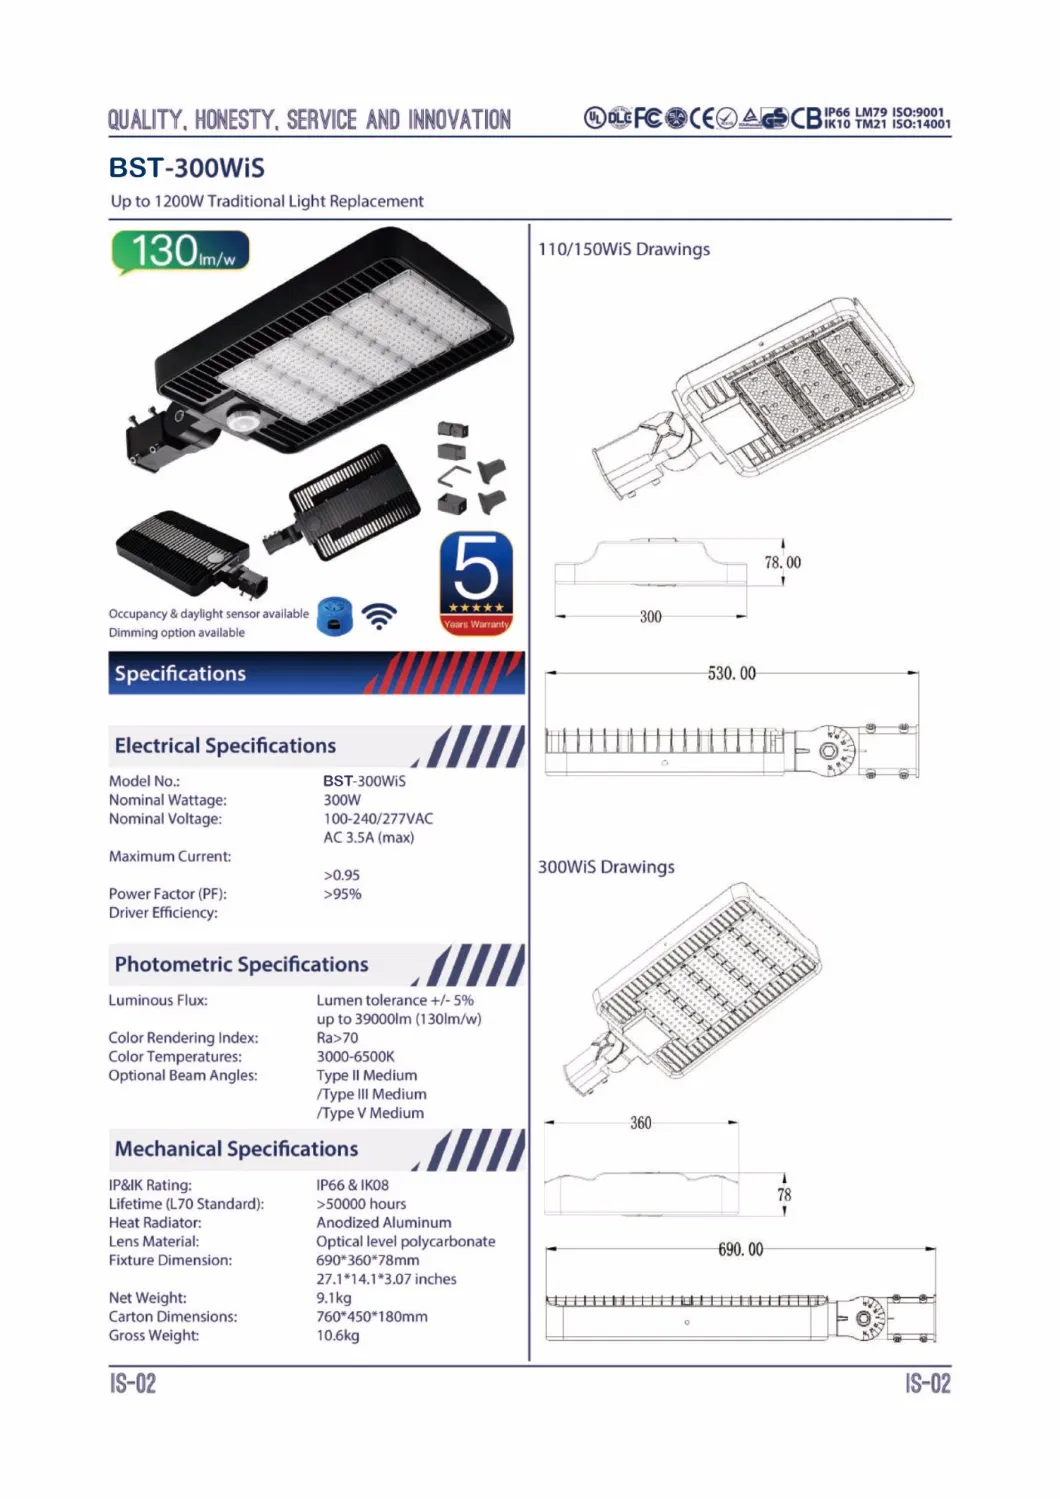 160-200W HID Replacement LED Street and Parking Light